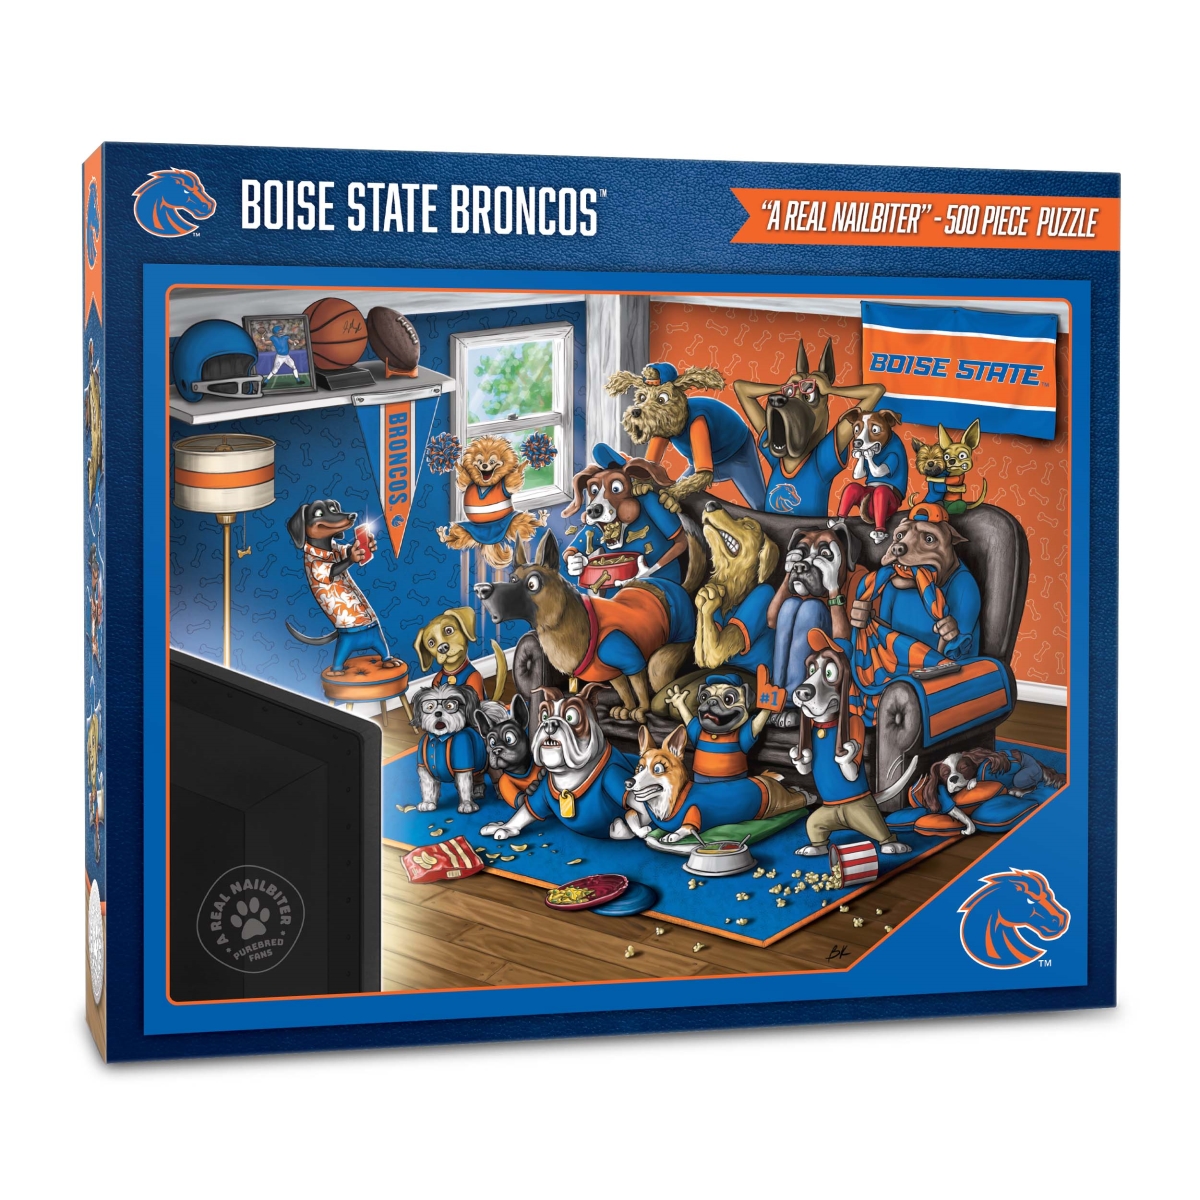 Picture of YouTheFan 2502816 18 x 24 in. NCAA Boise State Broncos Purebred Fans Puzzle&#44; Multi Color - A Real Nailbiter - 500 Piece